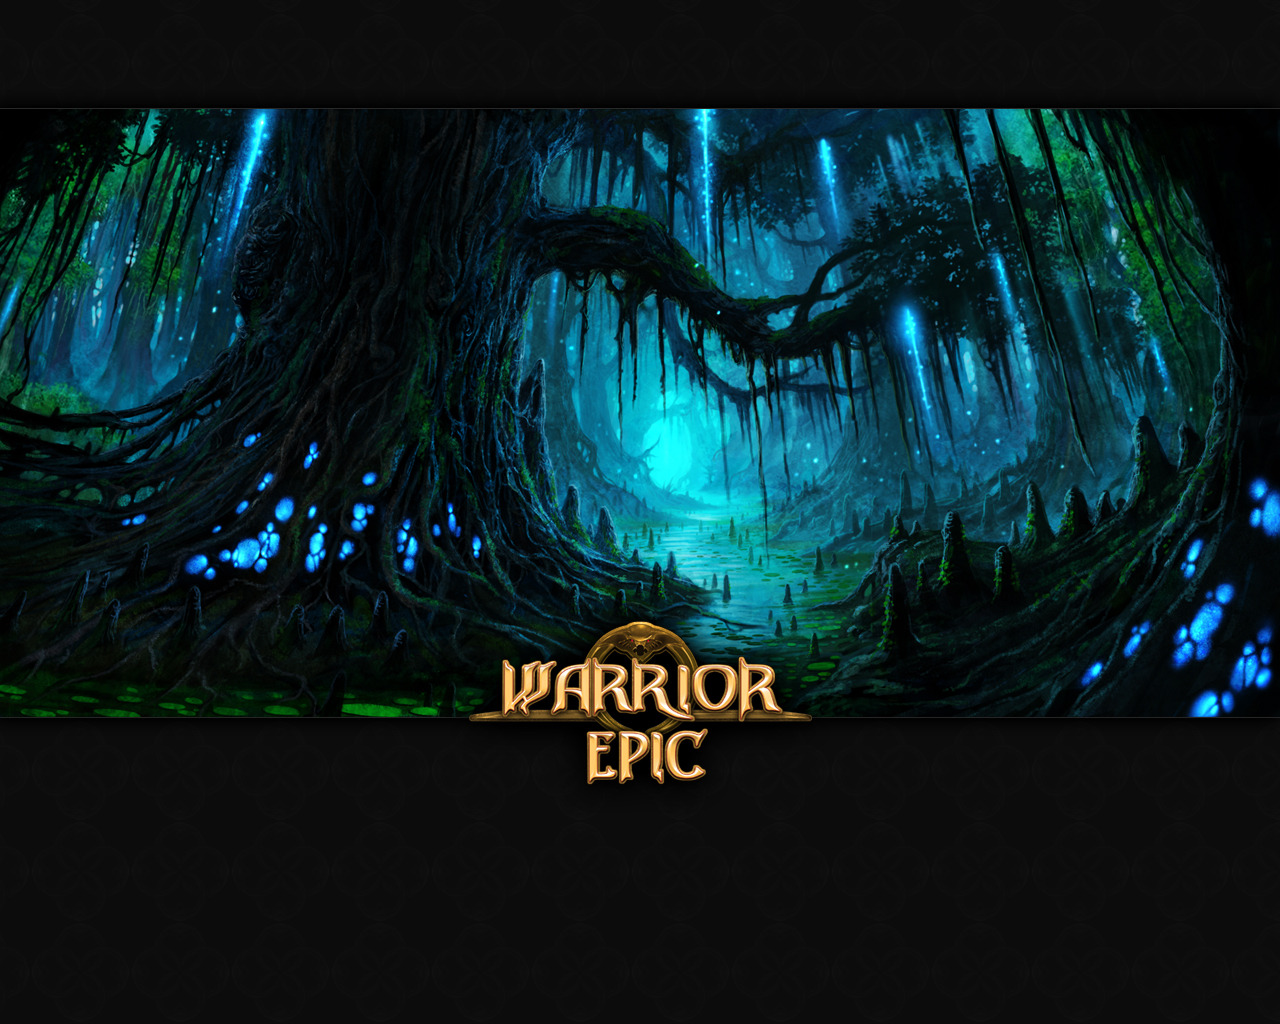 13 Warrior Epic HD Wallpapers | Backgrounds - Wallpaper Abyss